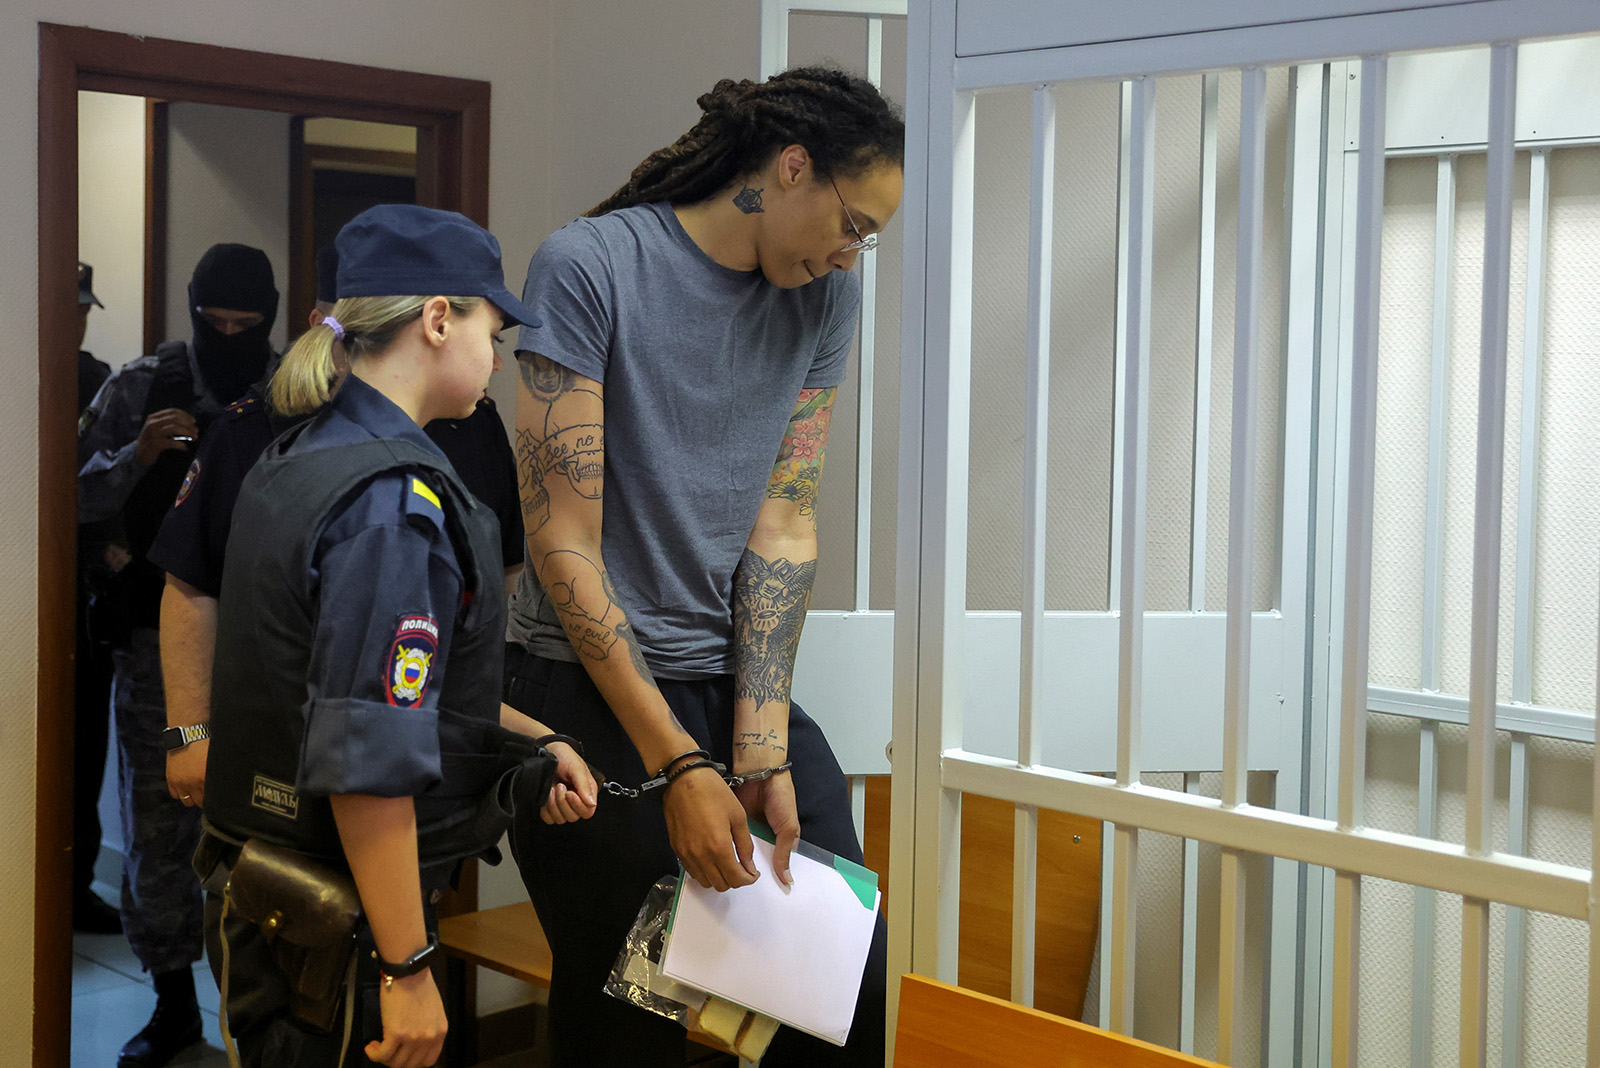 U.S. basketball player Brittney Griner is escorted before a court hearing in Khimki outside Moscow, Russia, on August 4.